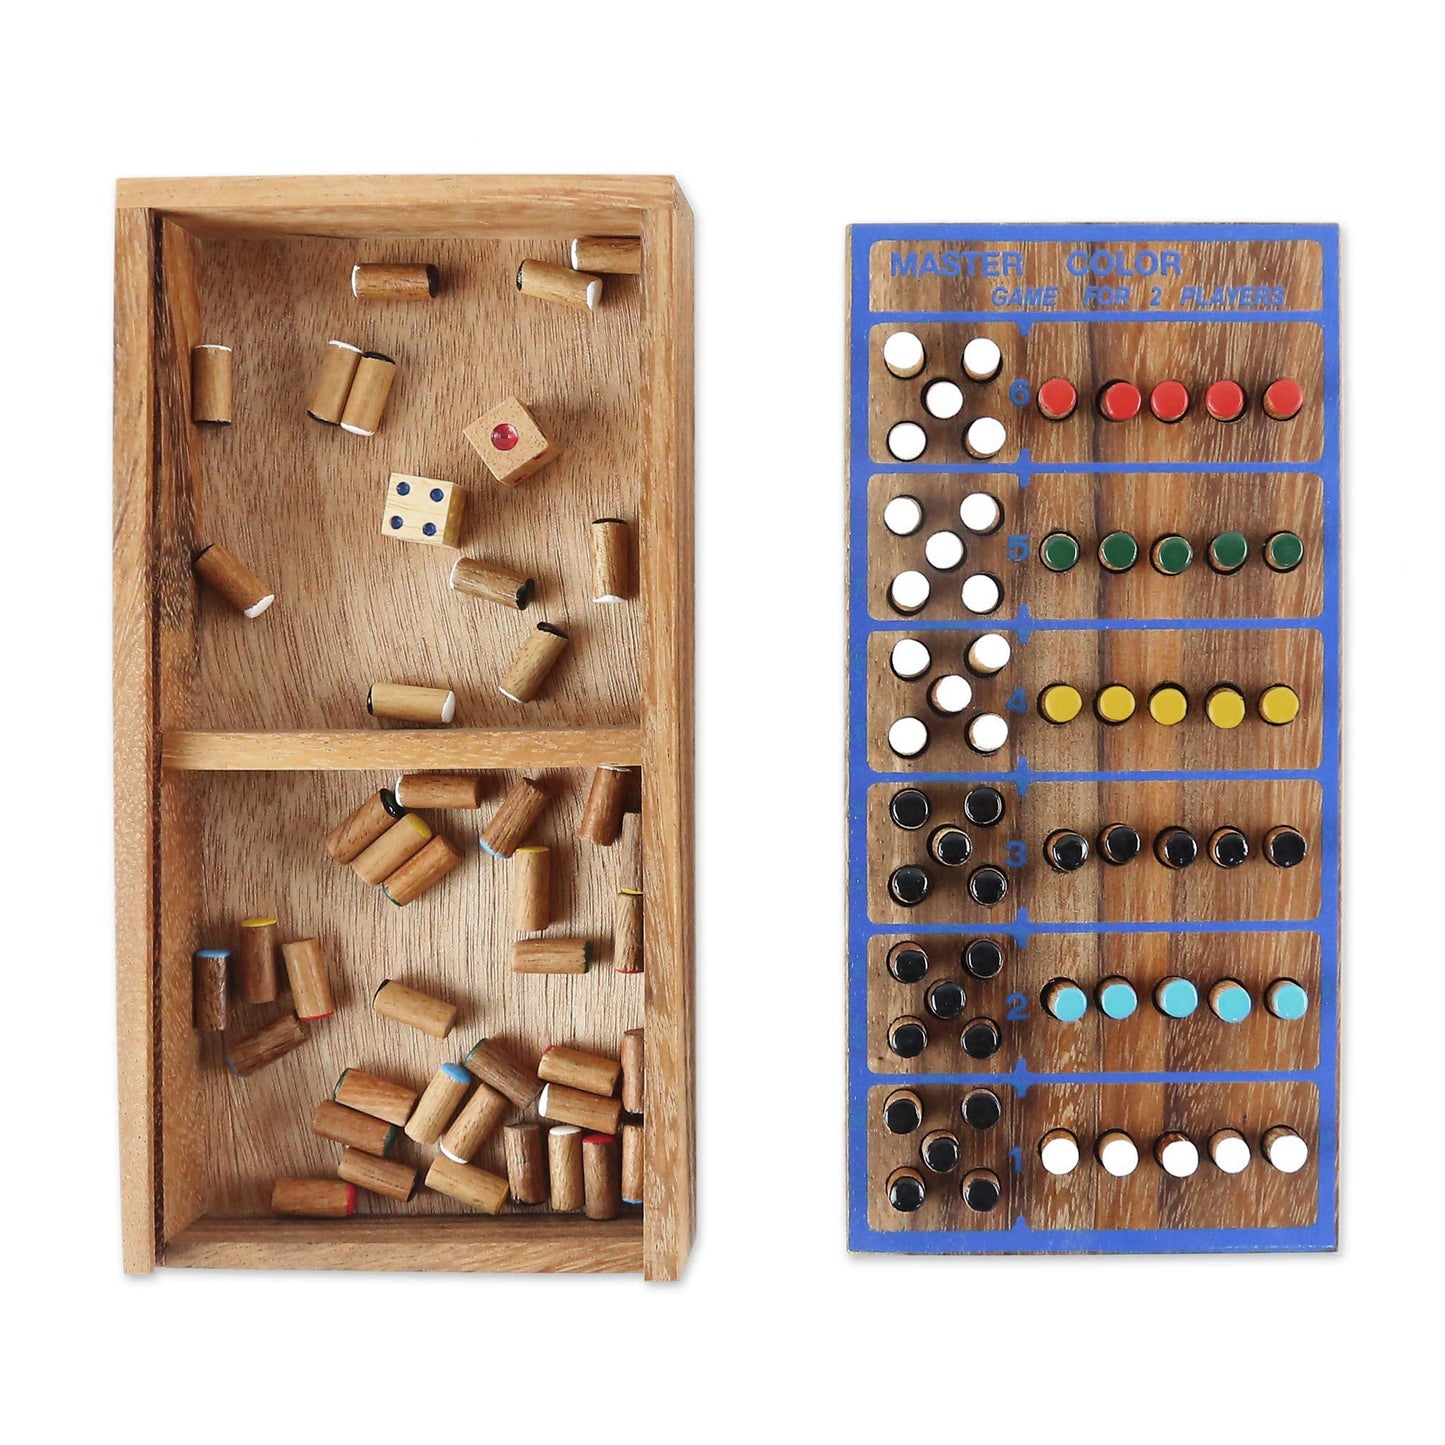 Code Breaker Hand Made Colorful Wood Peg Game from Thailand